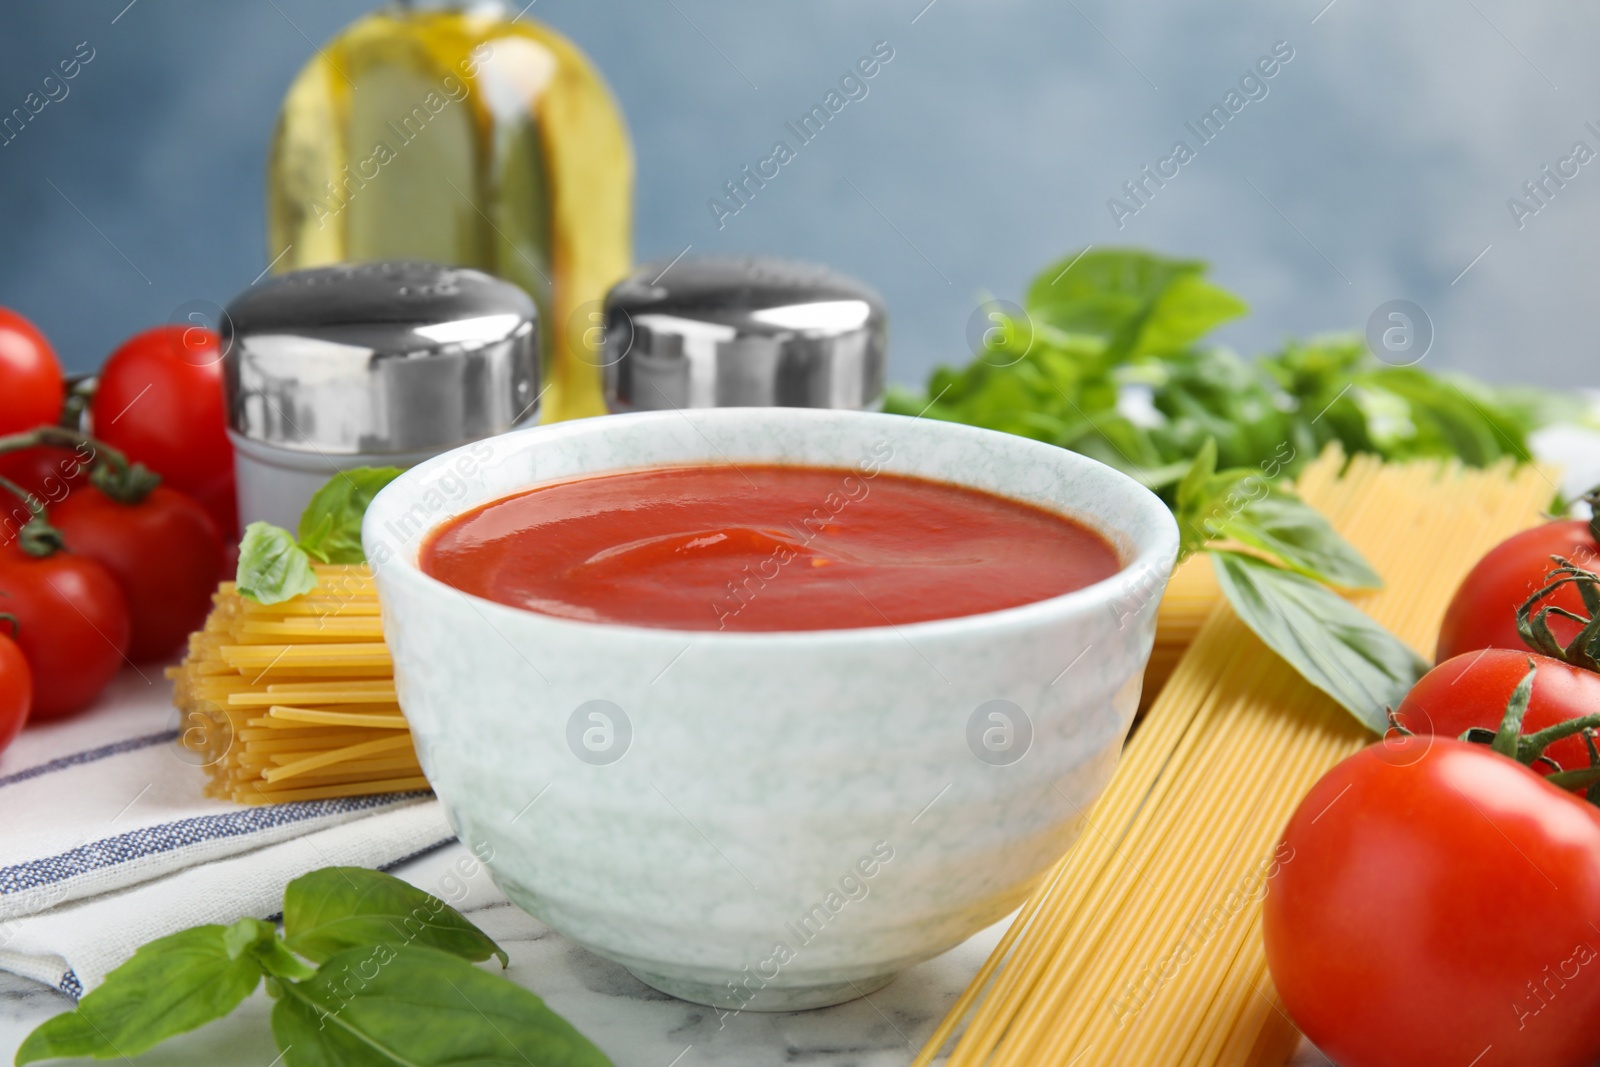 Photo of Bowl of tasty tomato sauce and pasta served on table